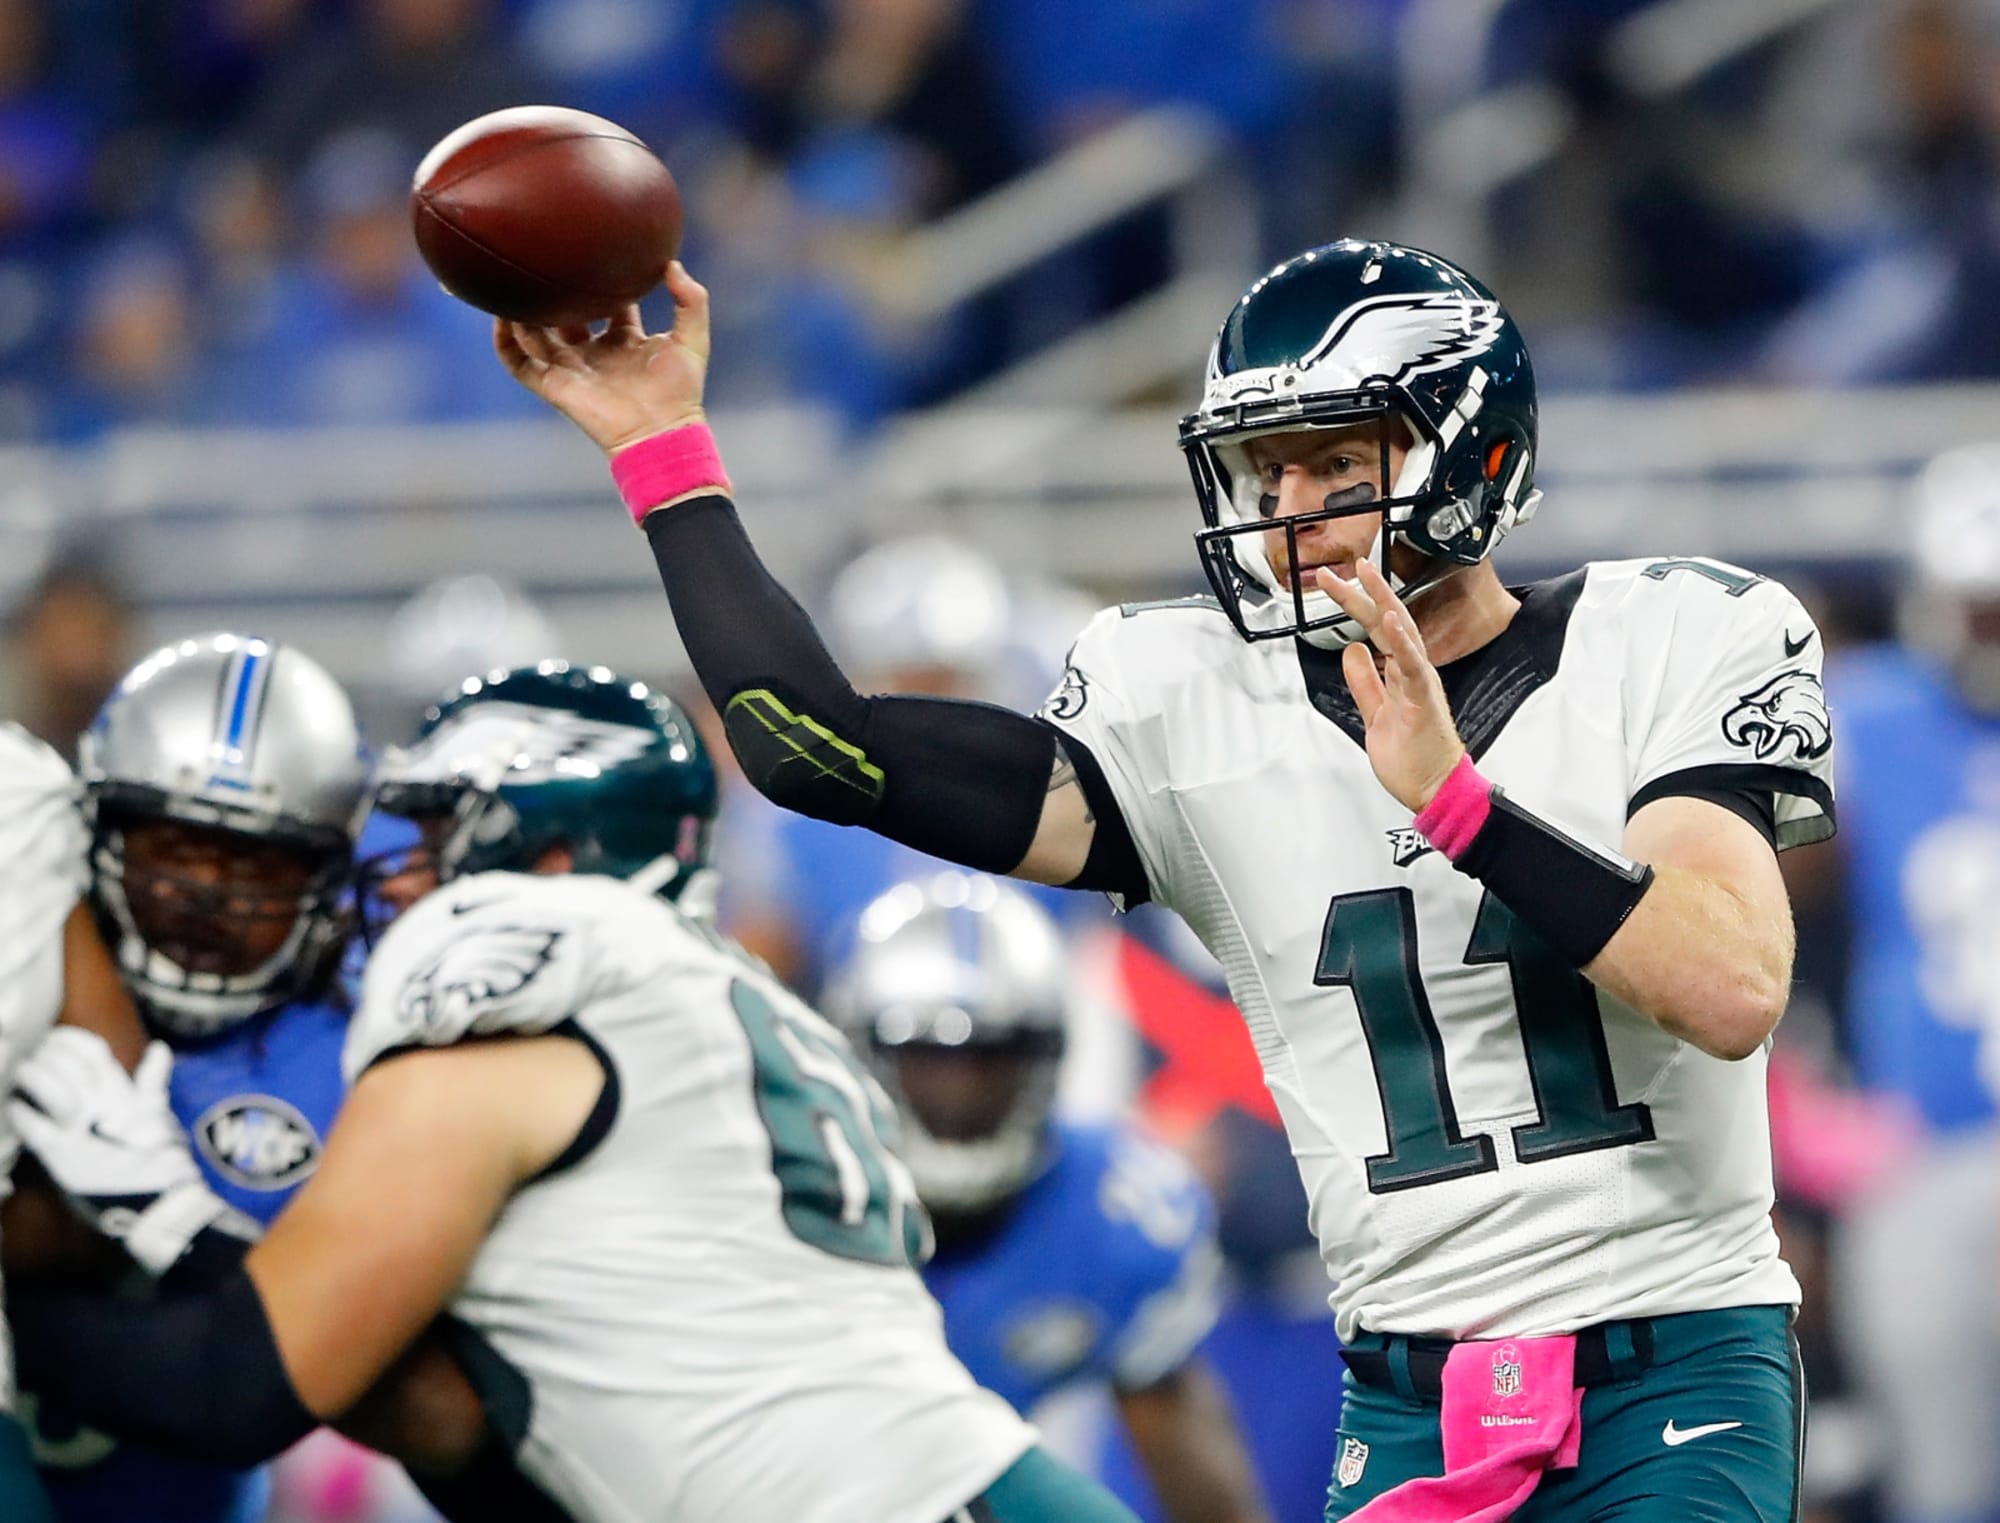 Short day for Eagles' Carson Wentz after long wait for his first